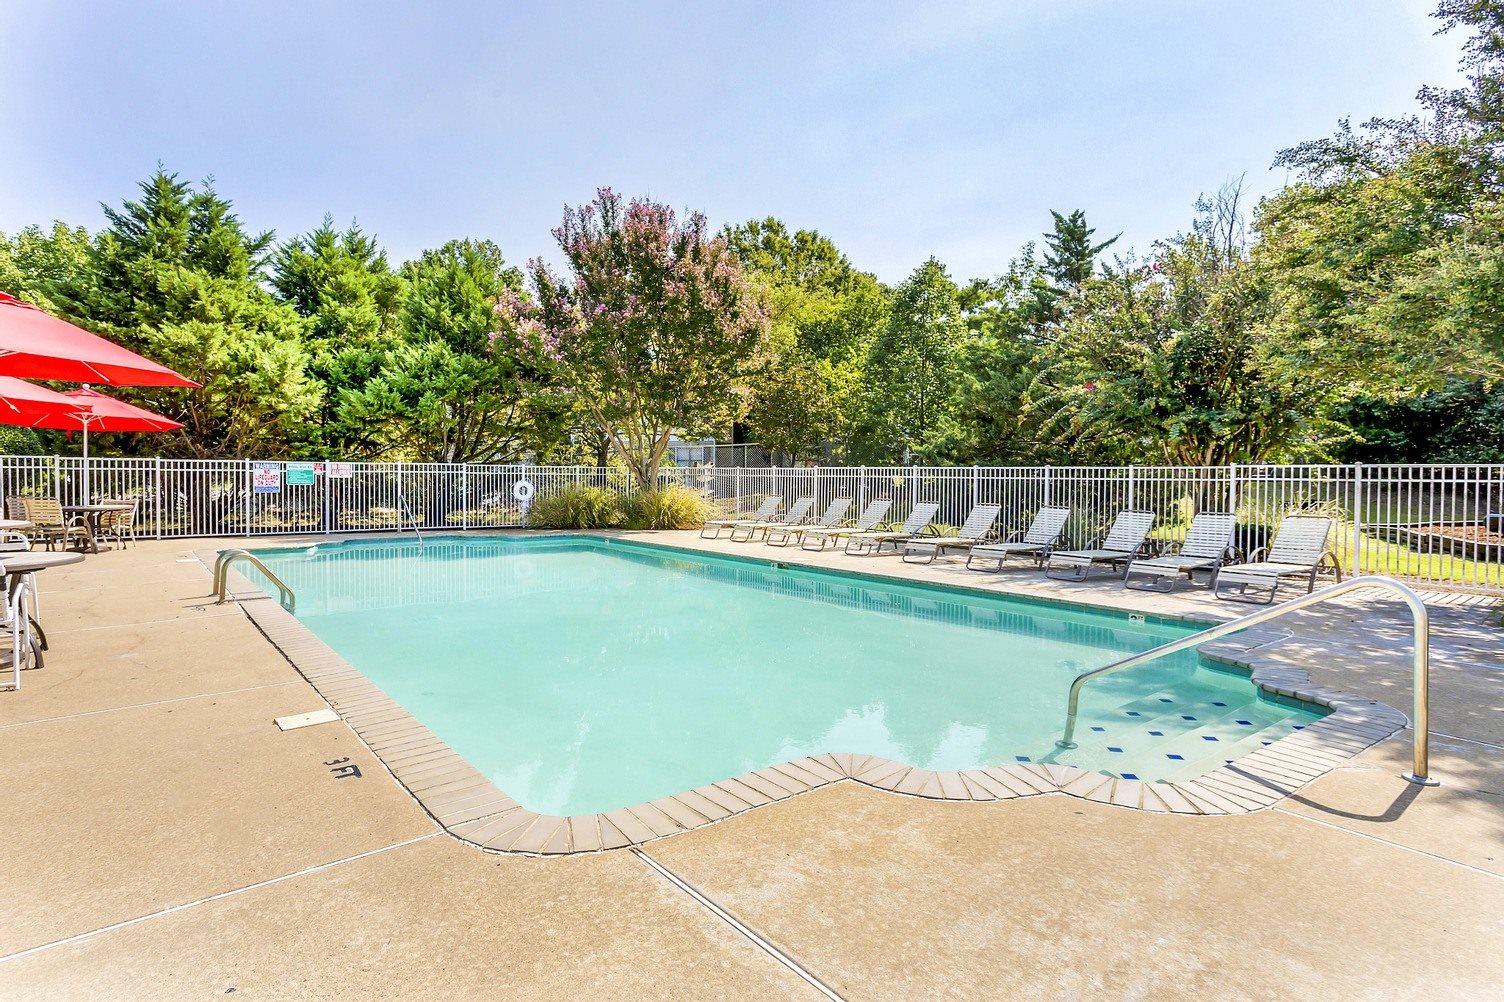 Community pool with sundeck, lounge chairs, surrounded by white metal fence with trees in the background